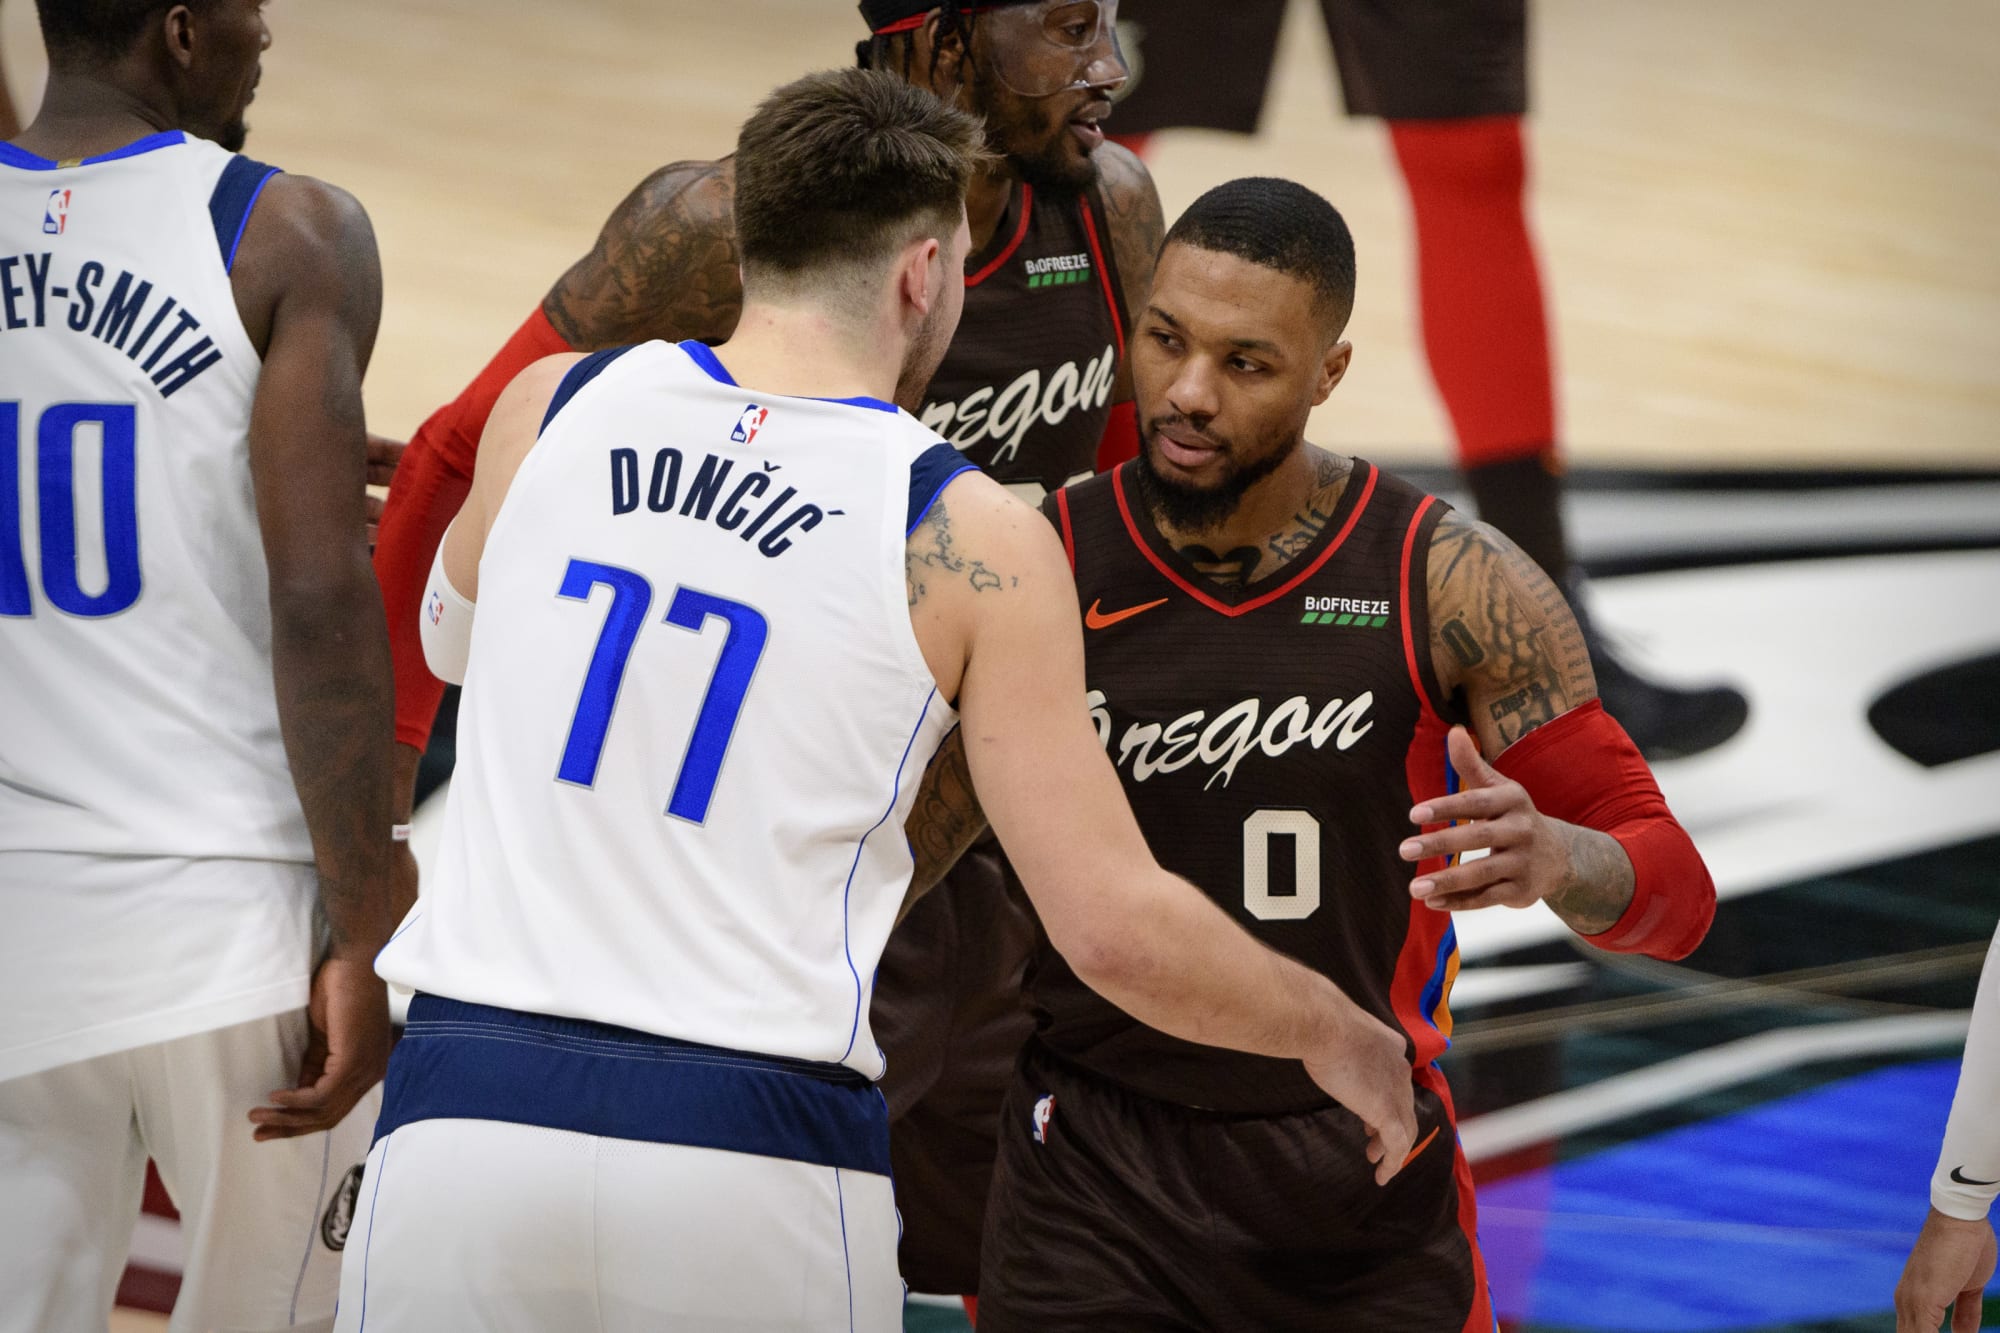 37 Best Images Nba Playoffs Start Today : NBA Standings 2019: Warriors, Nuggets, Thunder lead ...